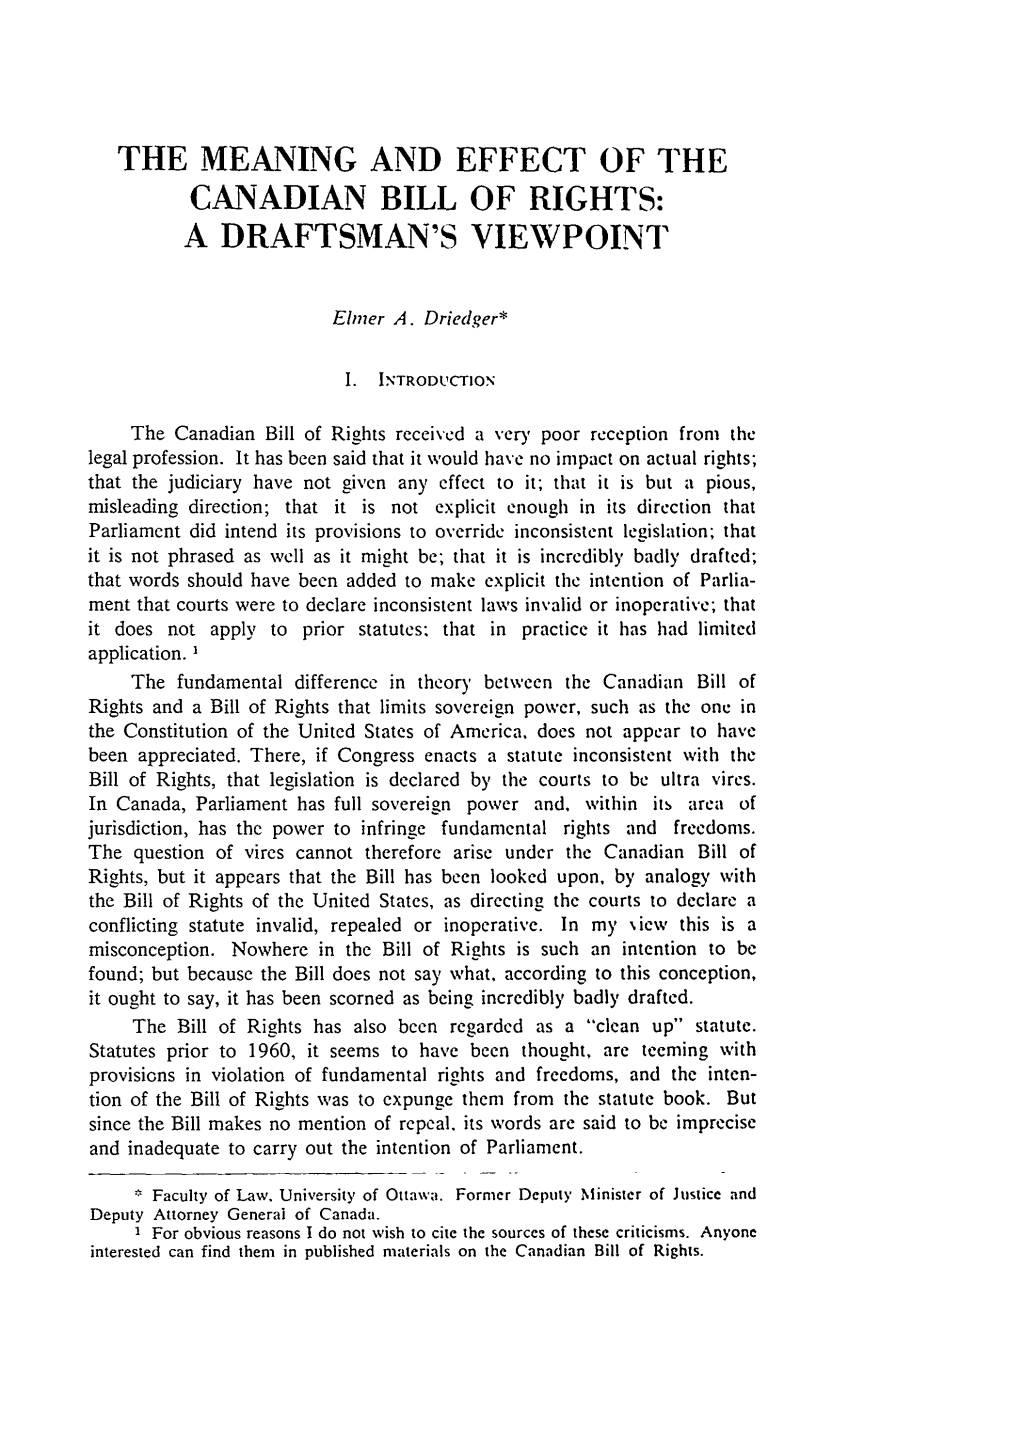 Meaning and Effect of the Canadian Bill of Rights: a Draftsman's Viewpoint